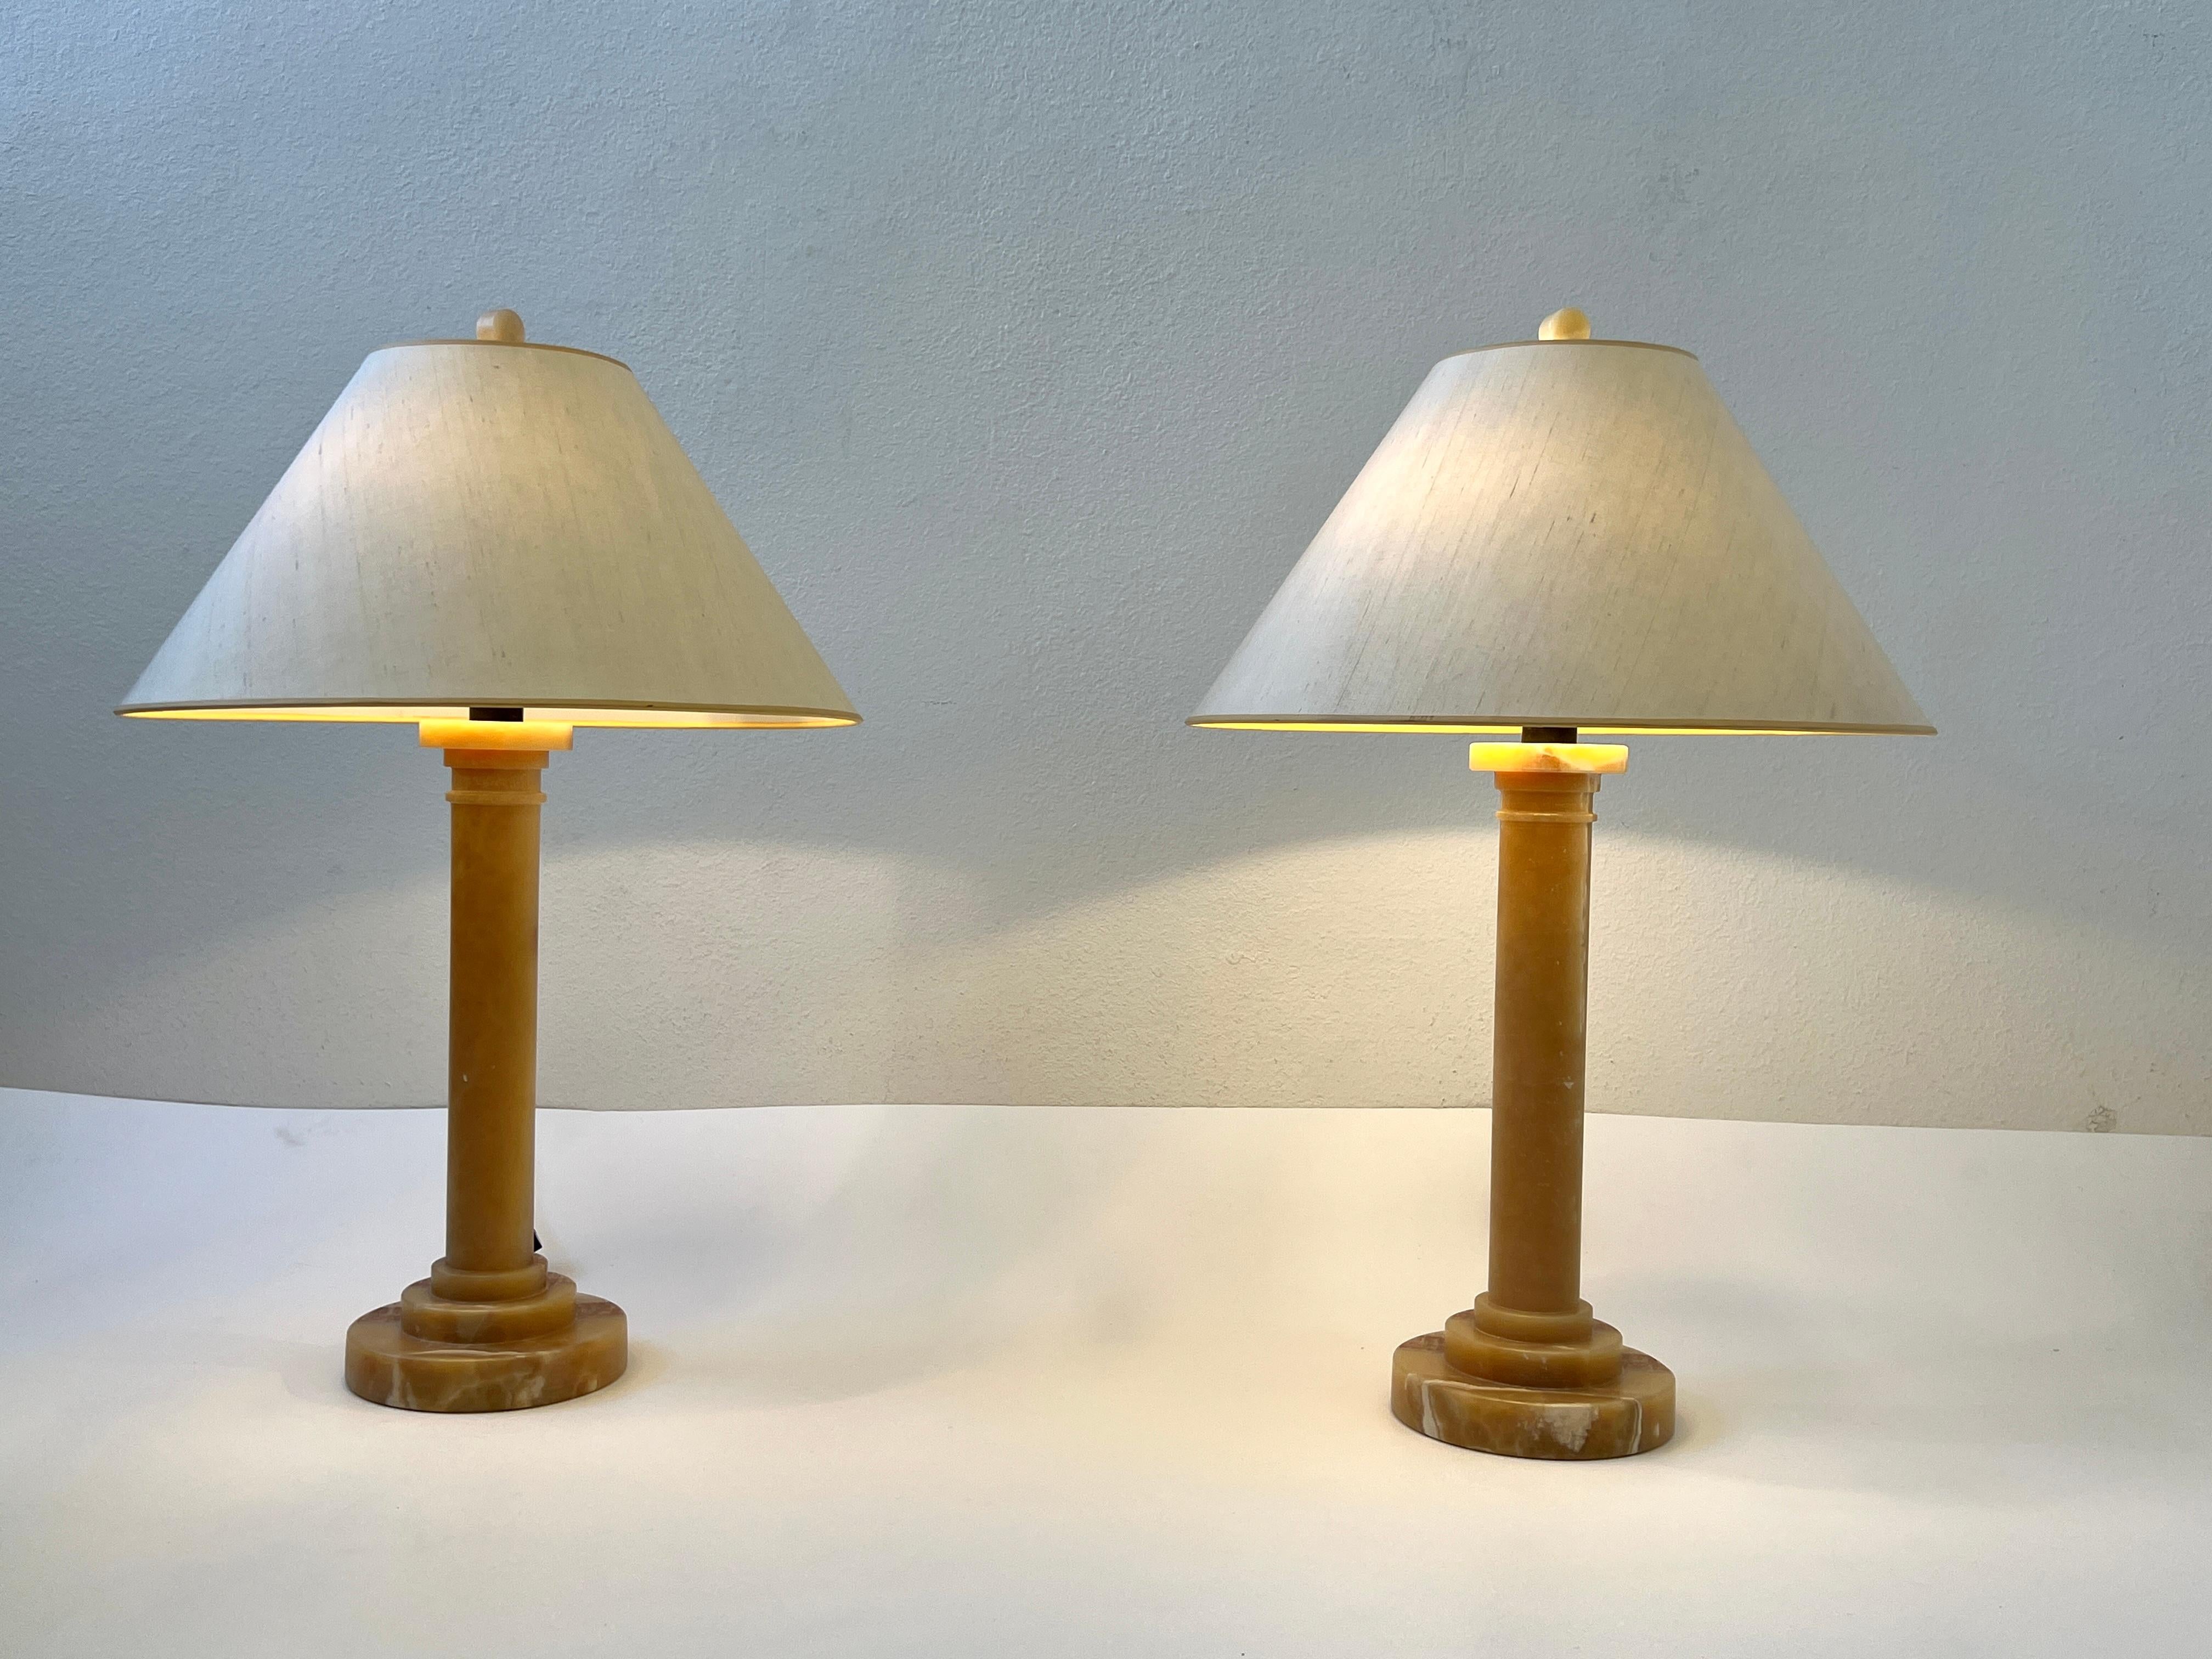 Pair of 1990’s alabaster and aged bronze table lamps by Donghia.
Newly rewired, the lamps have original off white silk lamp shades. One of the lamps retains the Donghia paper label. 

Measurements: 20.25” Diameter, 29.25” High, 8” Diameter base. The